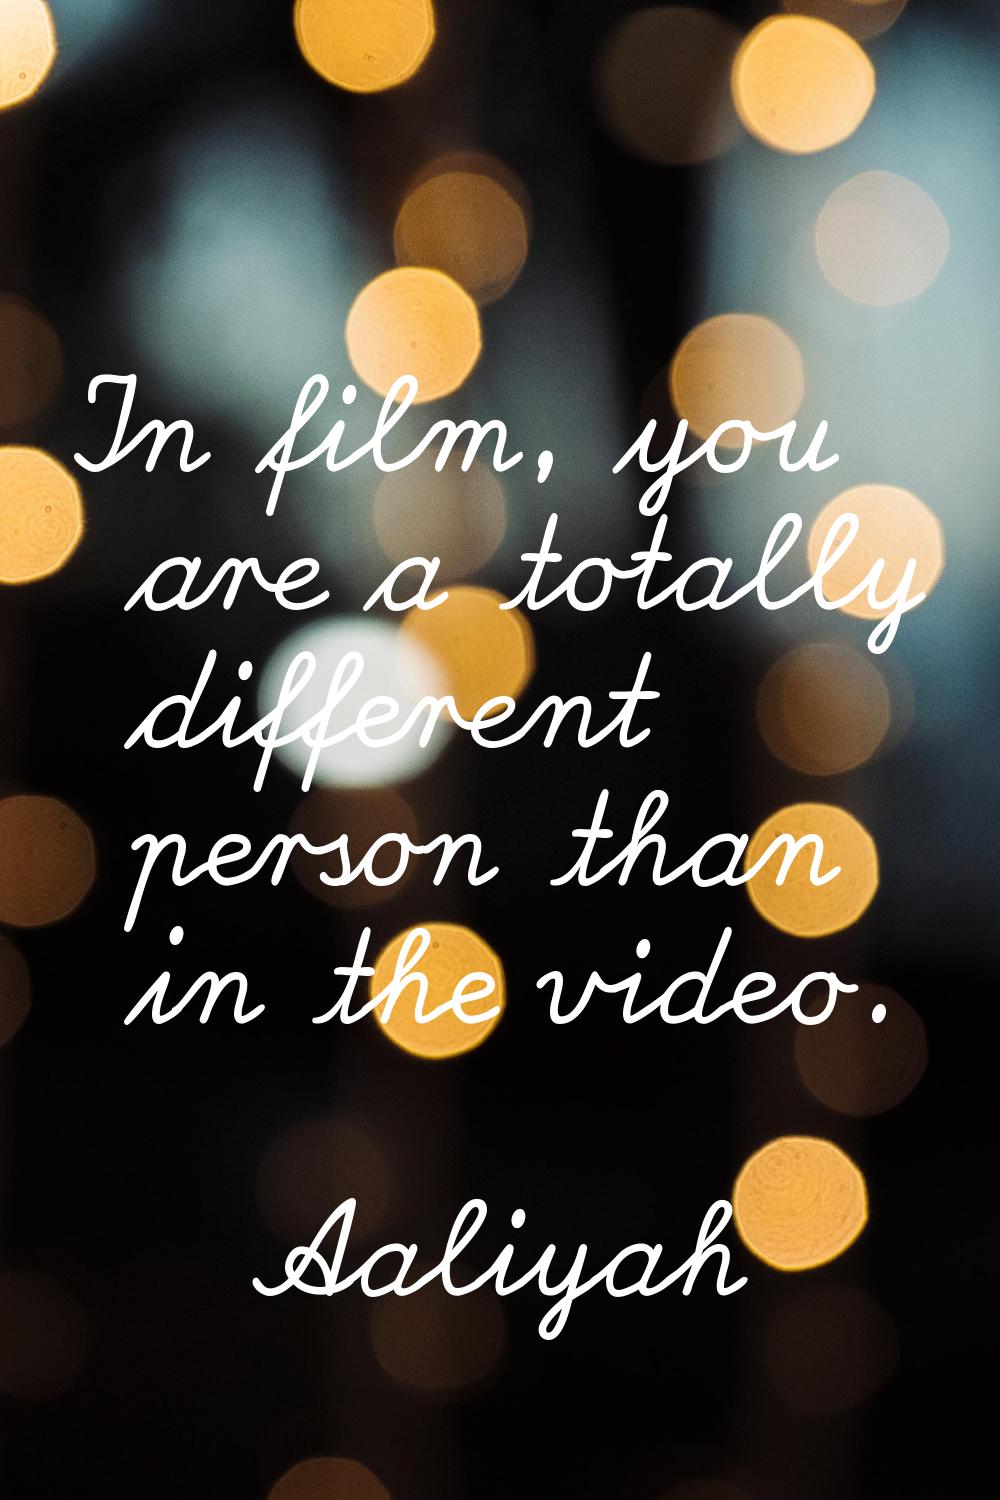 In film, you are a totally different person than in the video.